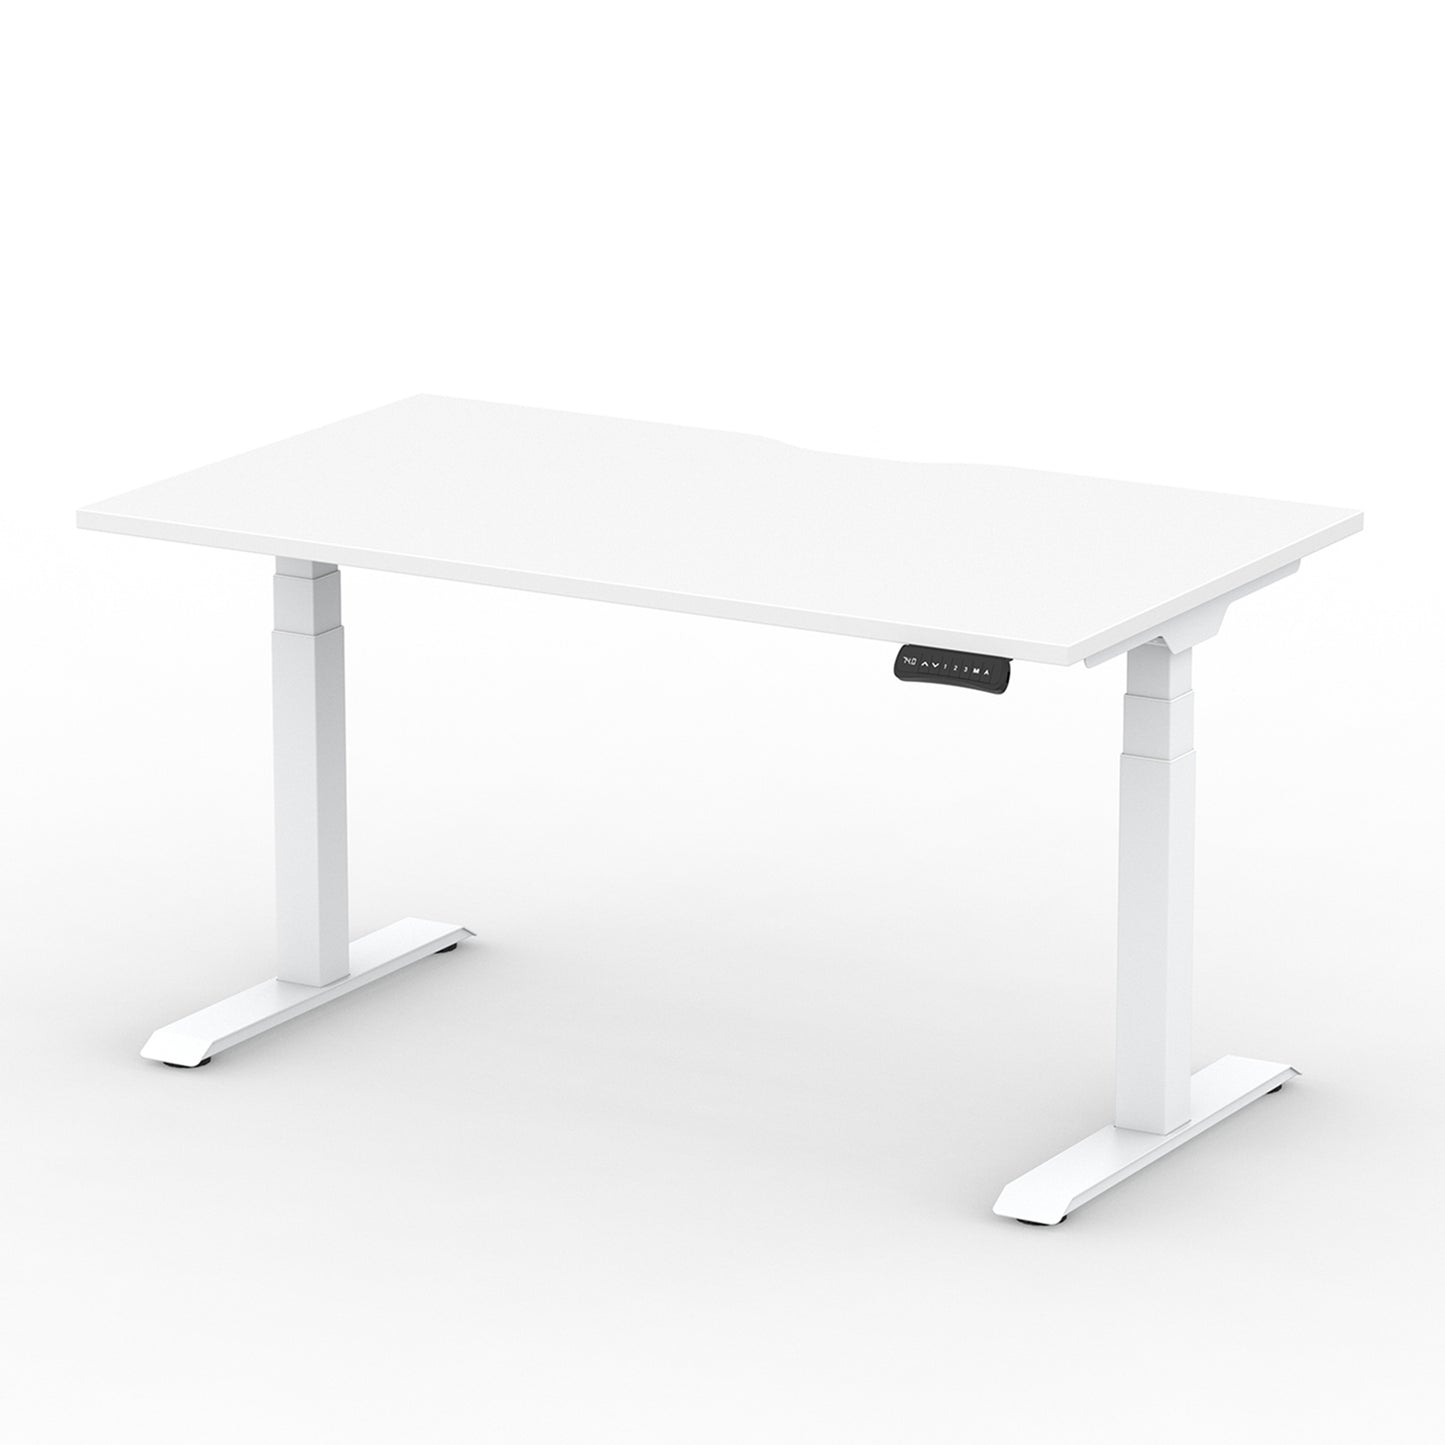 Alto 2 Electric Height Adjustable Sit Stand Desk